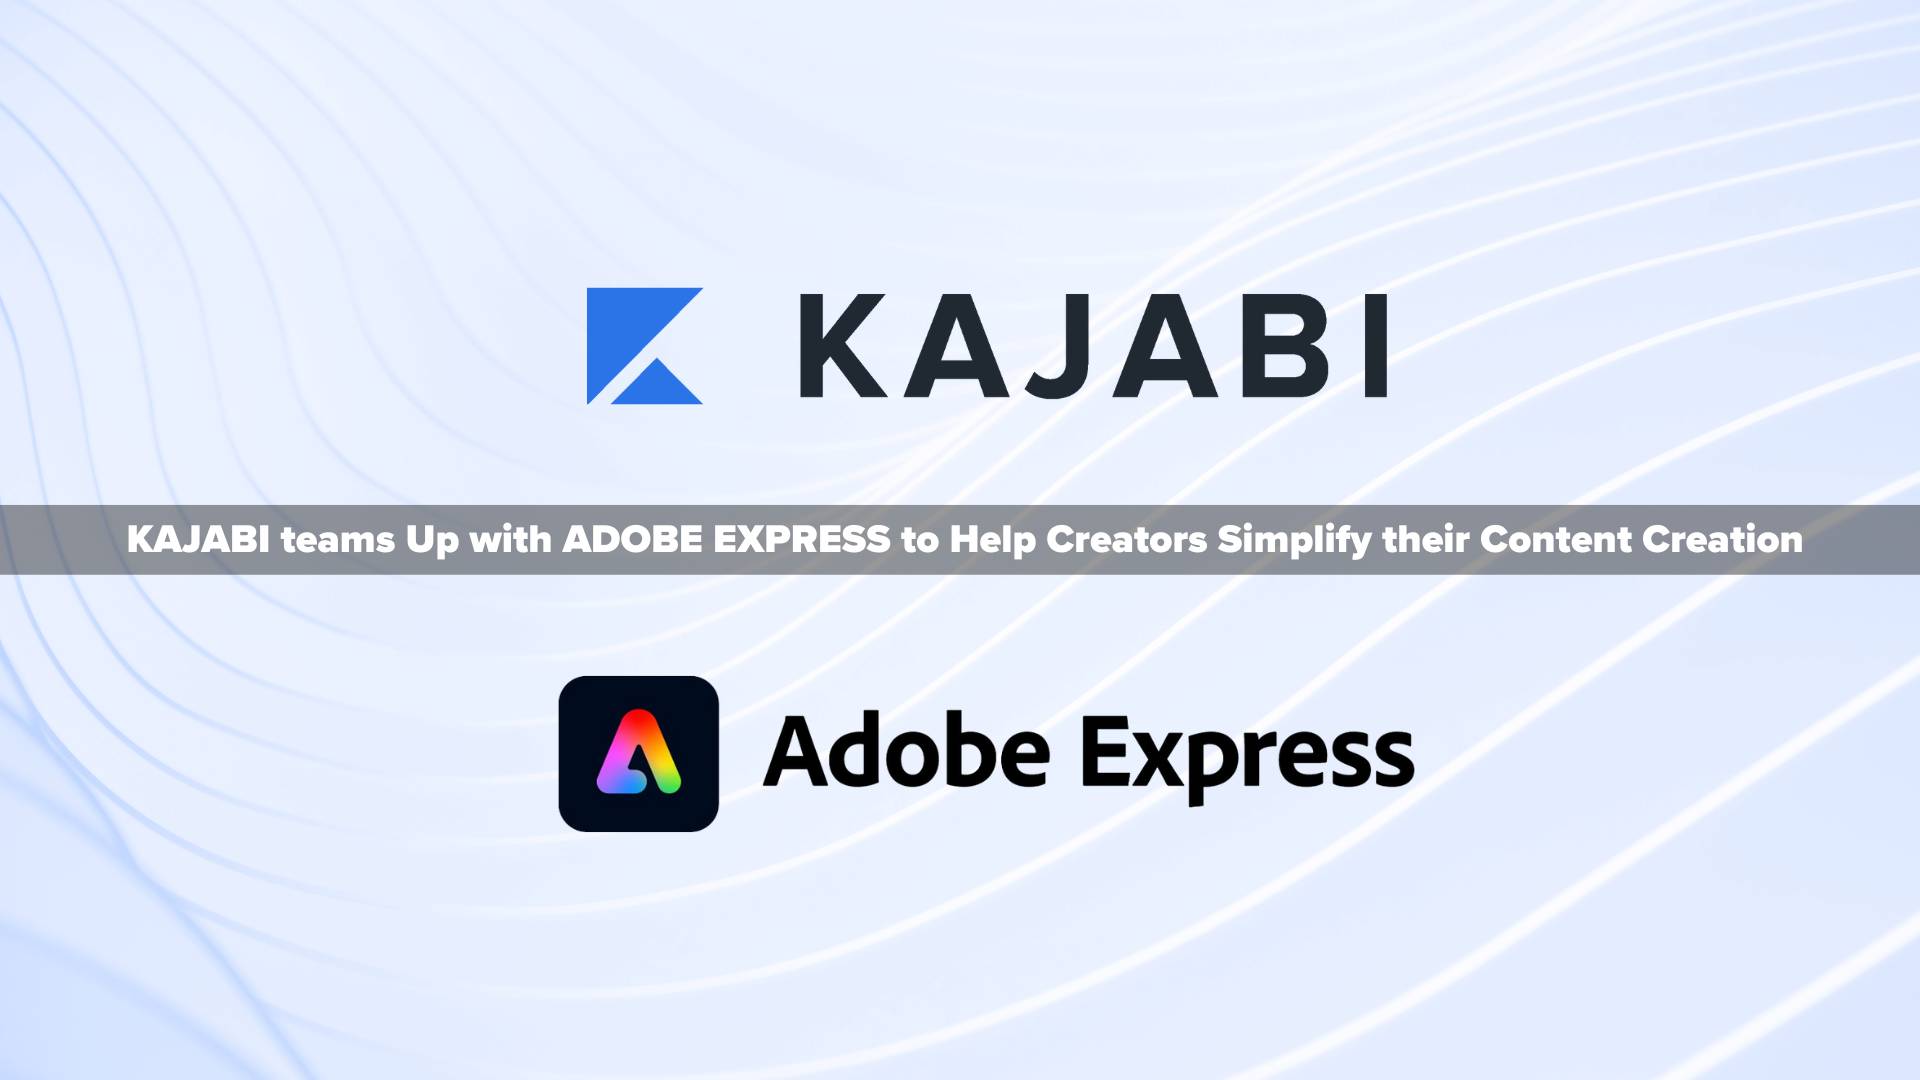 Kajabi Teams Up with Adobe Express to Help Creators Simplify their Content Creation for Business Growth